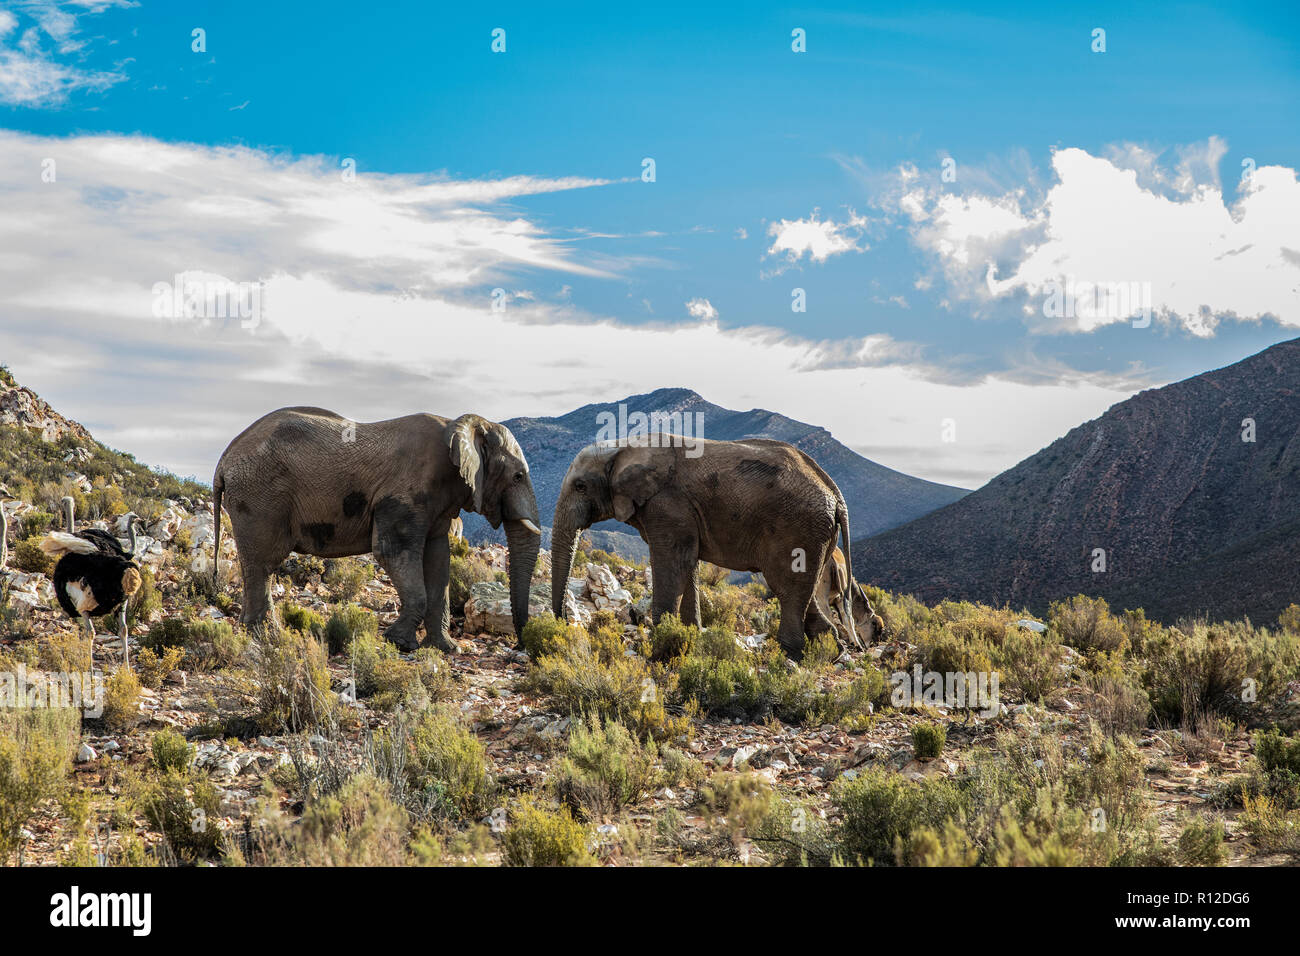 Pair of African elephants (Loxodonta), Touws River, Western Cape, South Africa Stock Photo